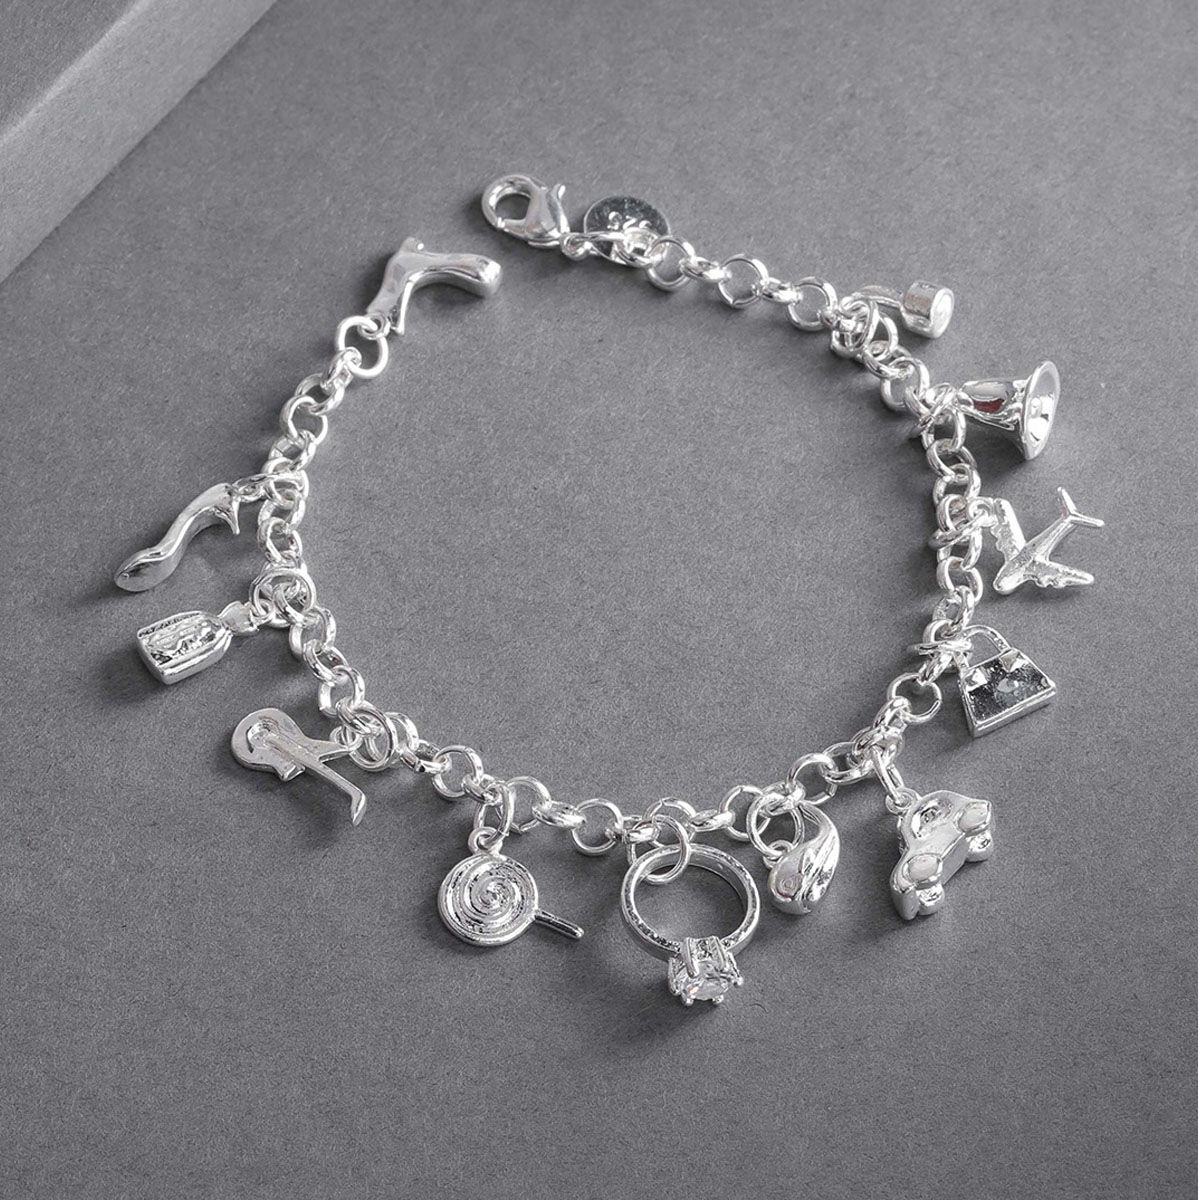 Buy 20cm Silver Plated Charm Bracelet Large Heart Lobster Link Online in  India  Etsy